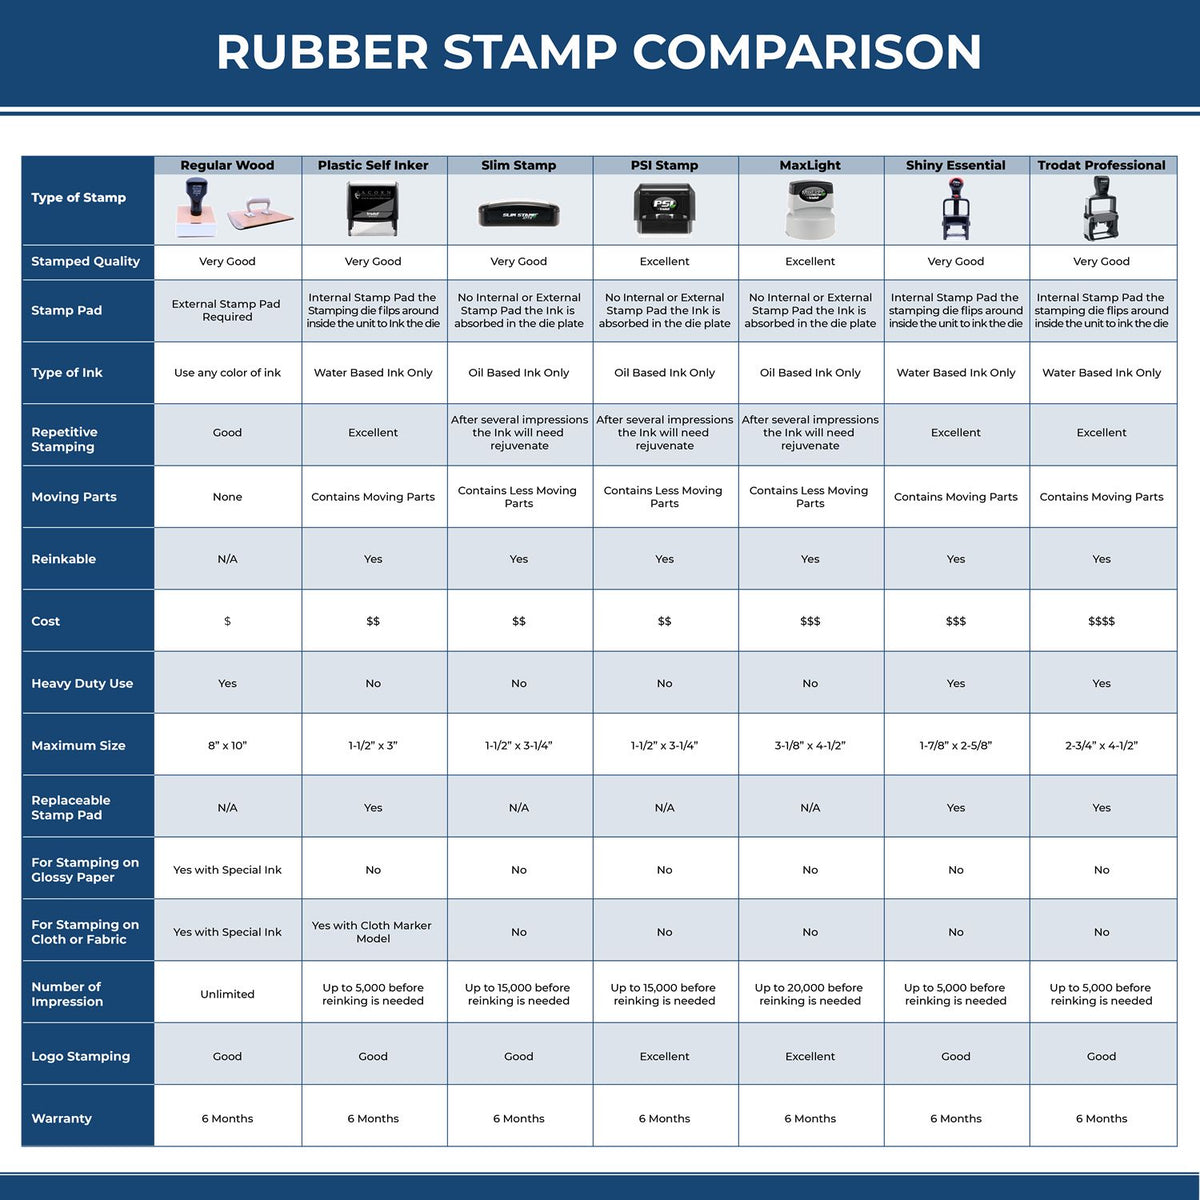 Large Self-Inking Recycle with Logo Stamp 4962S Rubber Stamp Comparison